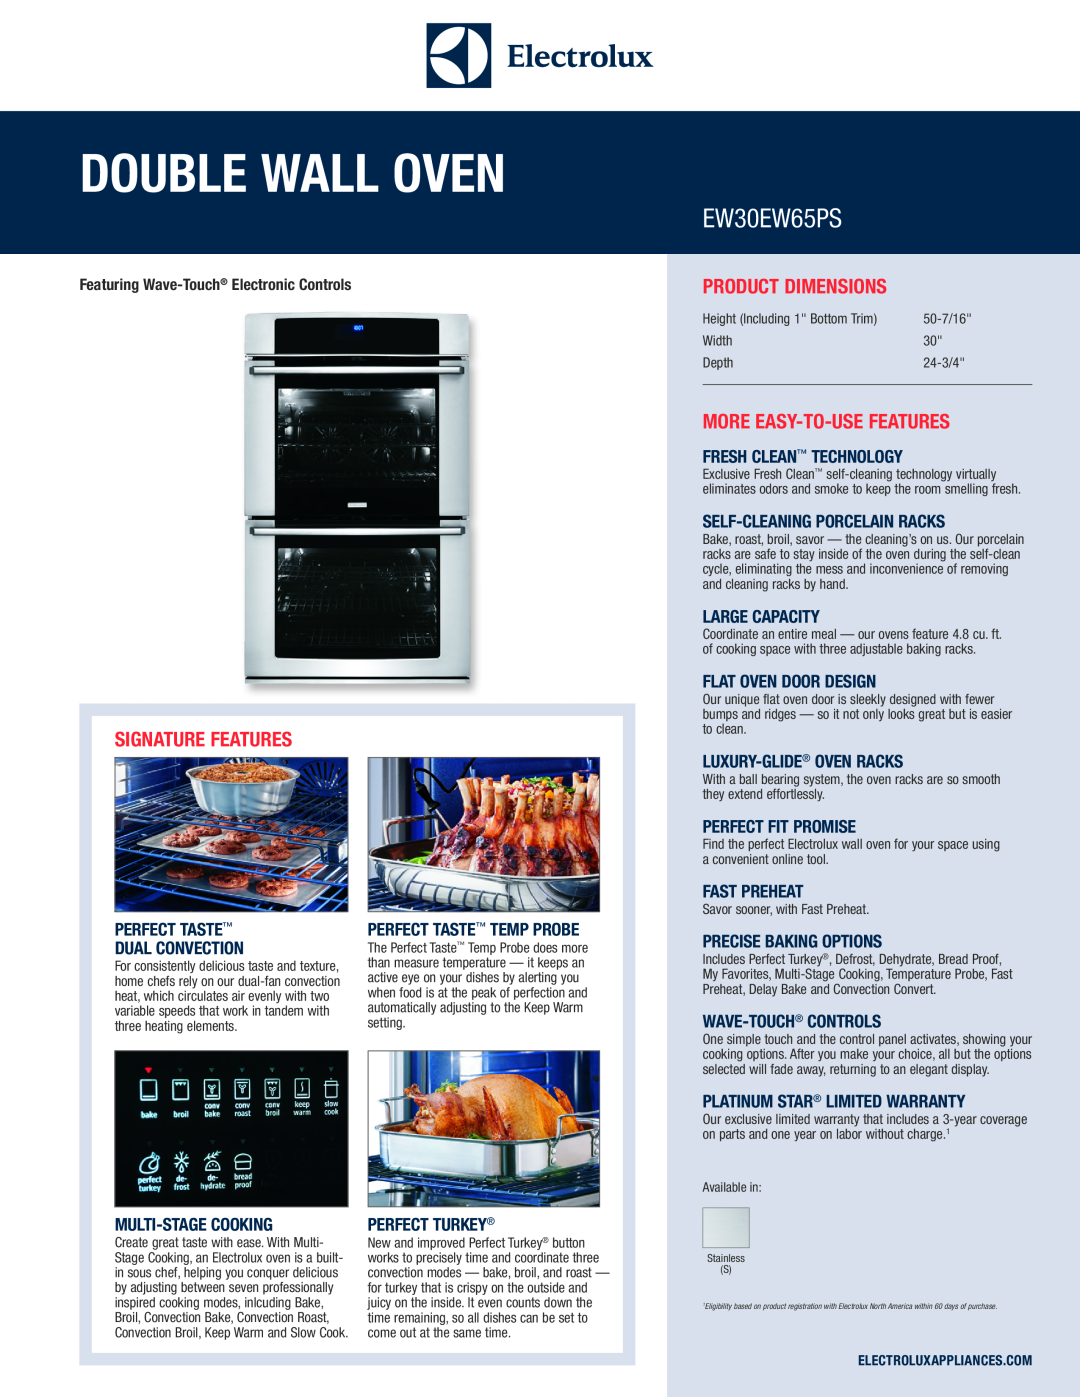 Electrolux EW30EW65PS dimensions Double Wall Oven, Signature Features, Product Dimensions, More Easy-To-Use Features 